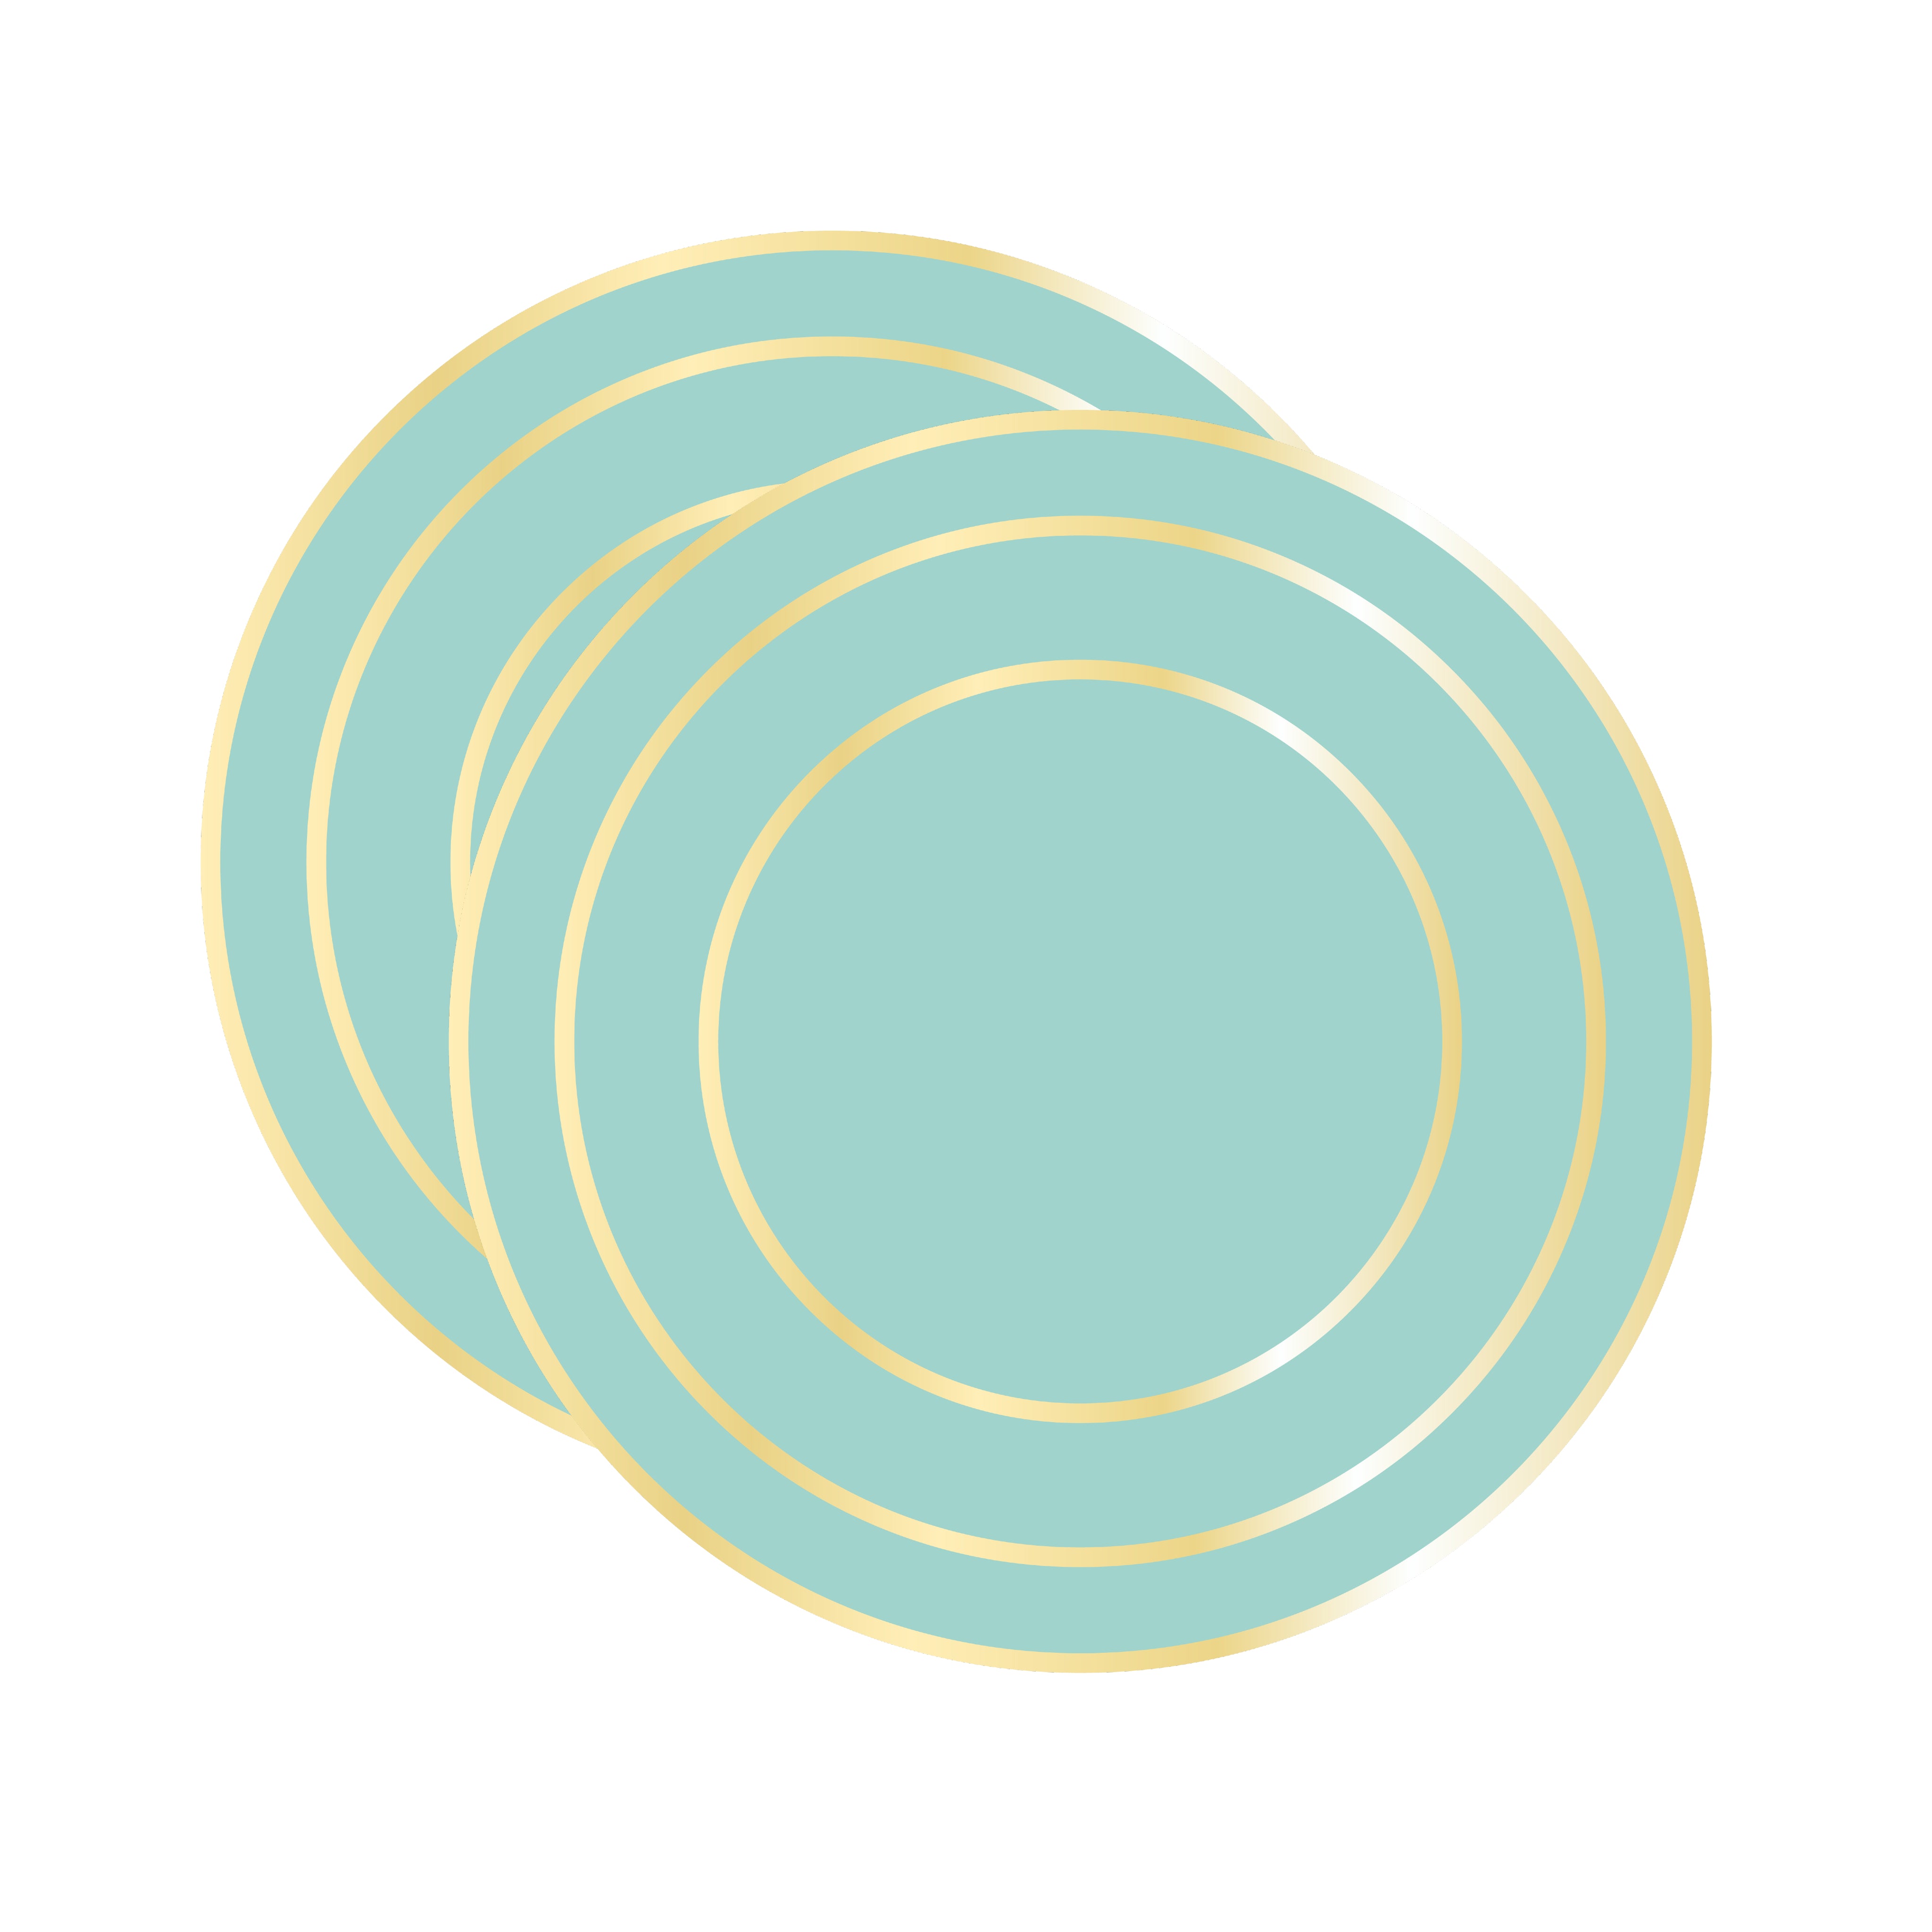 Dainty Home Concentric Foil Printed Geometric Designed Thick Cork Textured 15" x 15" Round Placemats